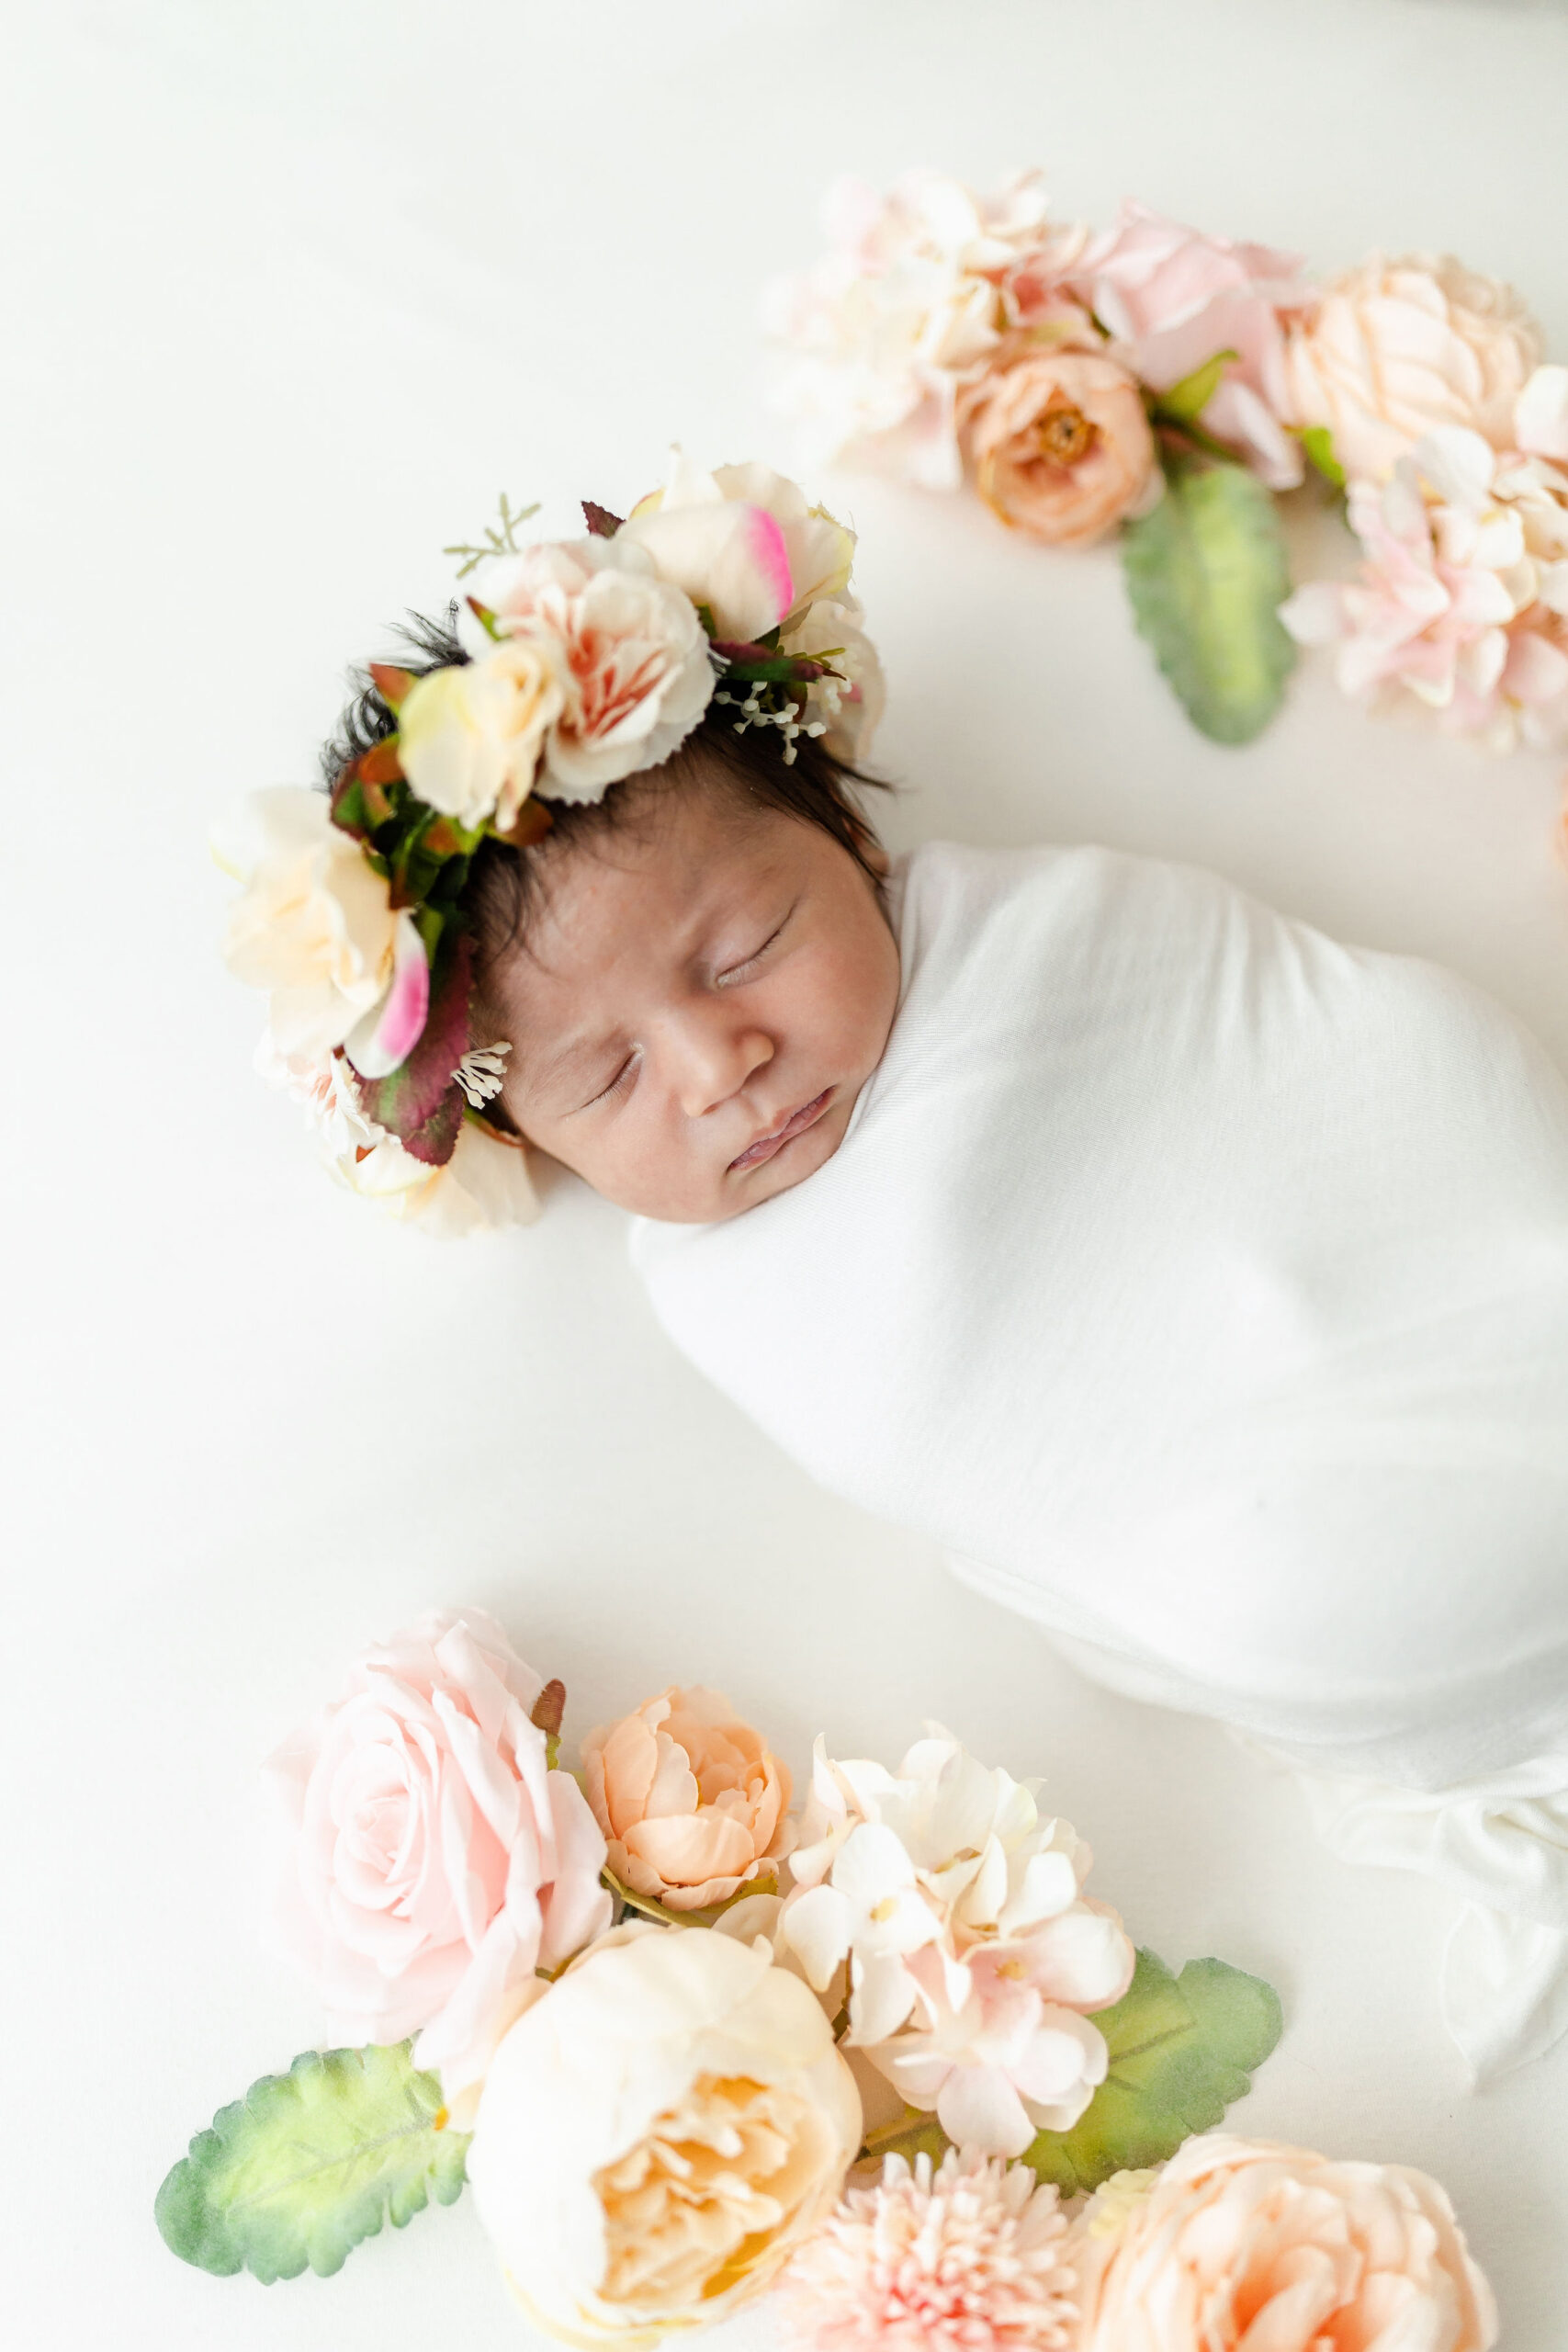 A newborn baby sleeps in a white swaddle surrounded by colorful flowers yoyo boutique